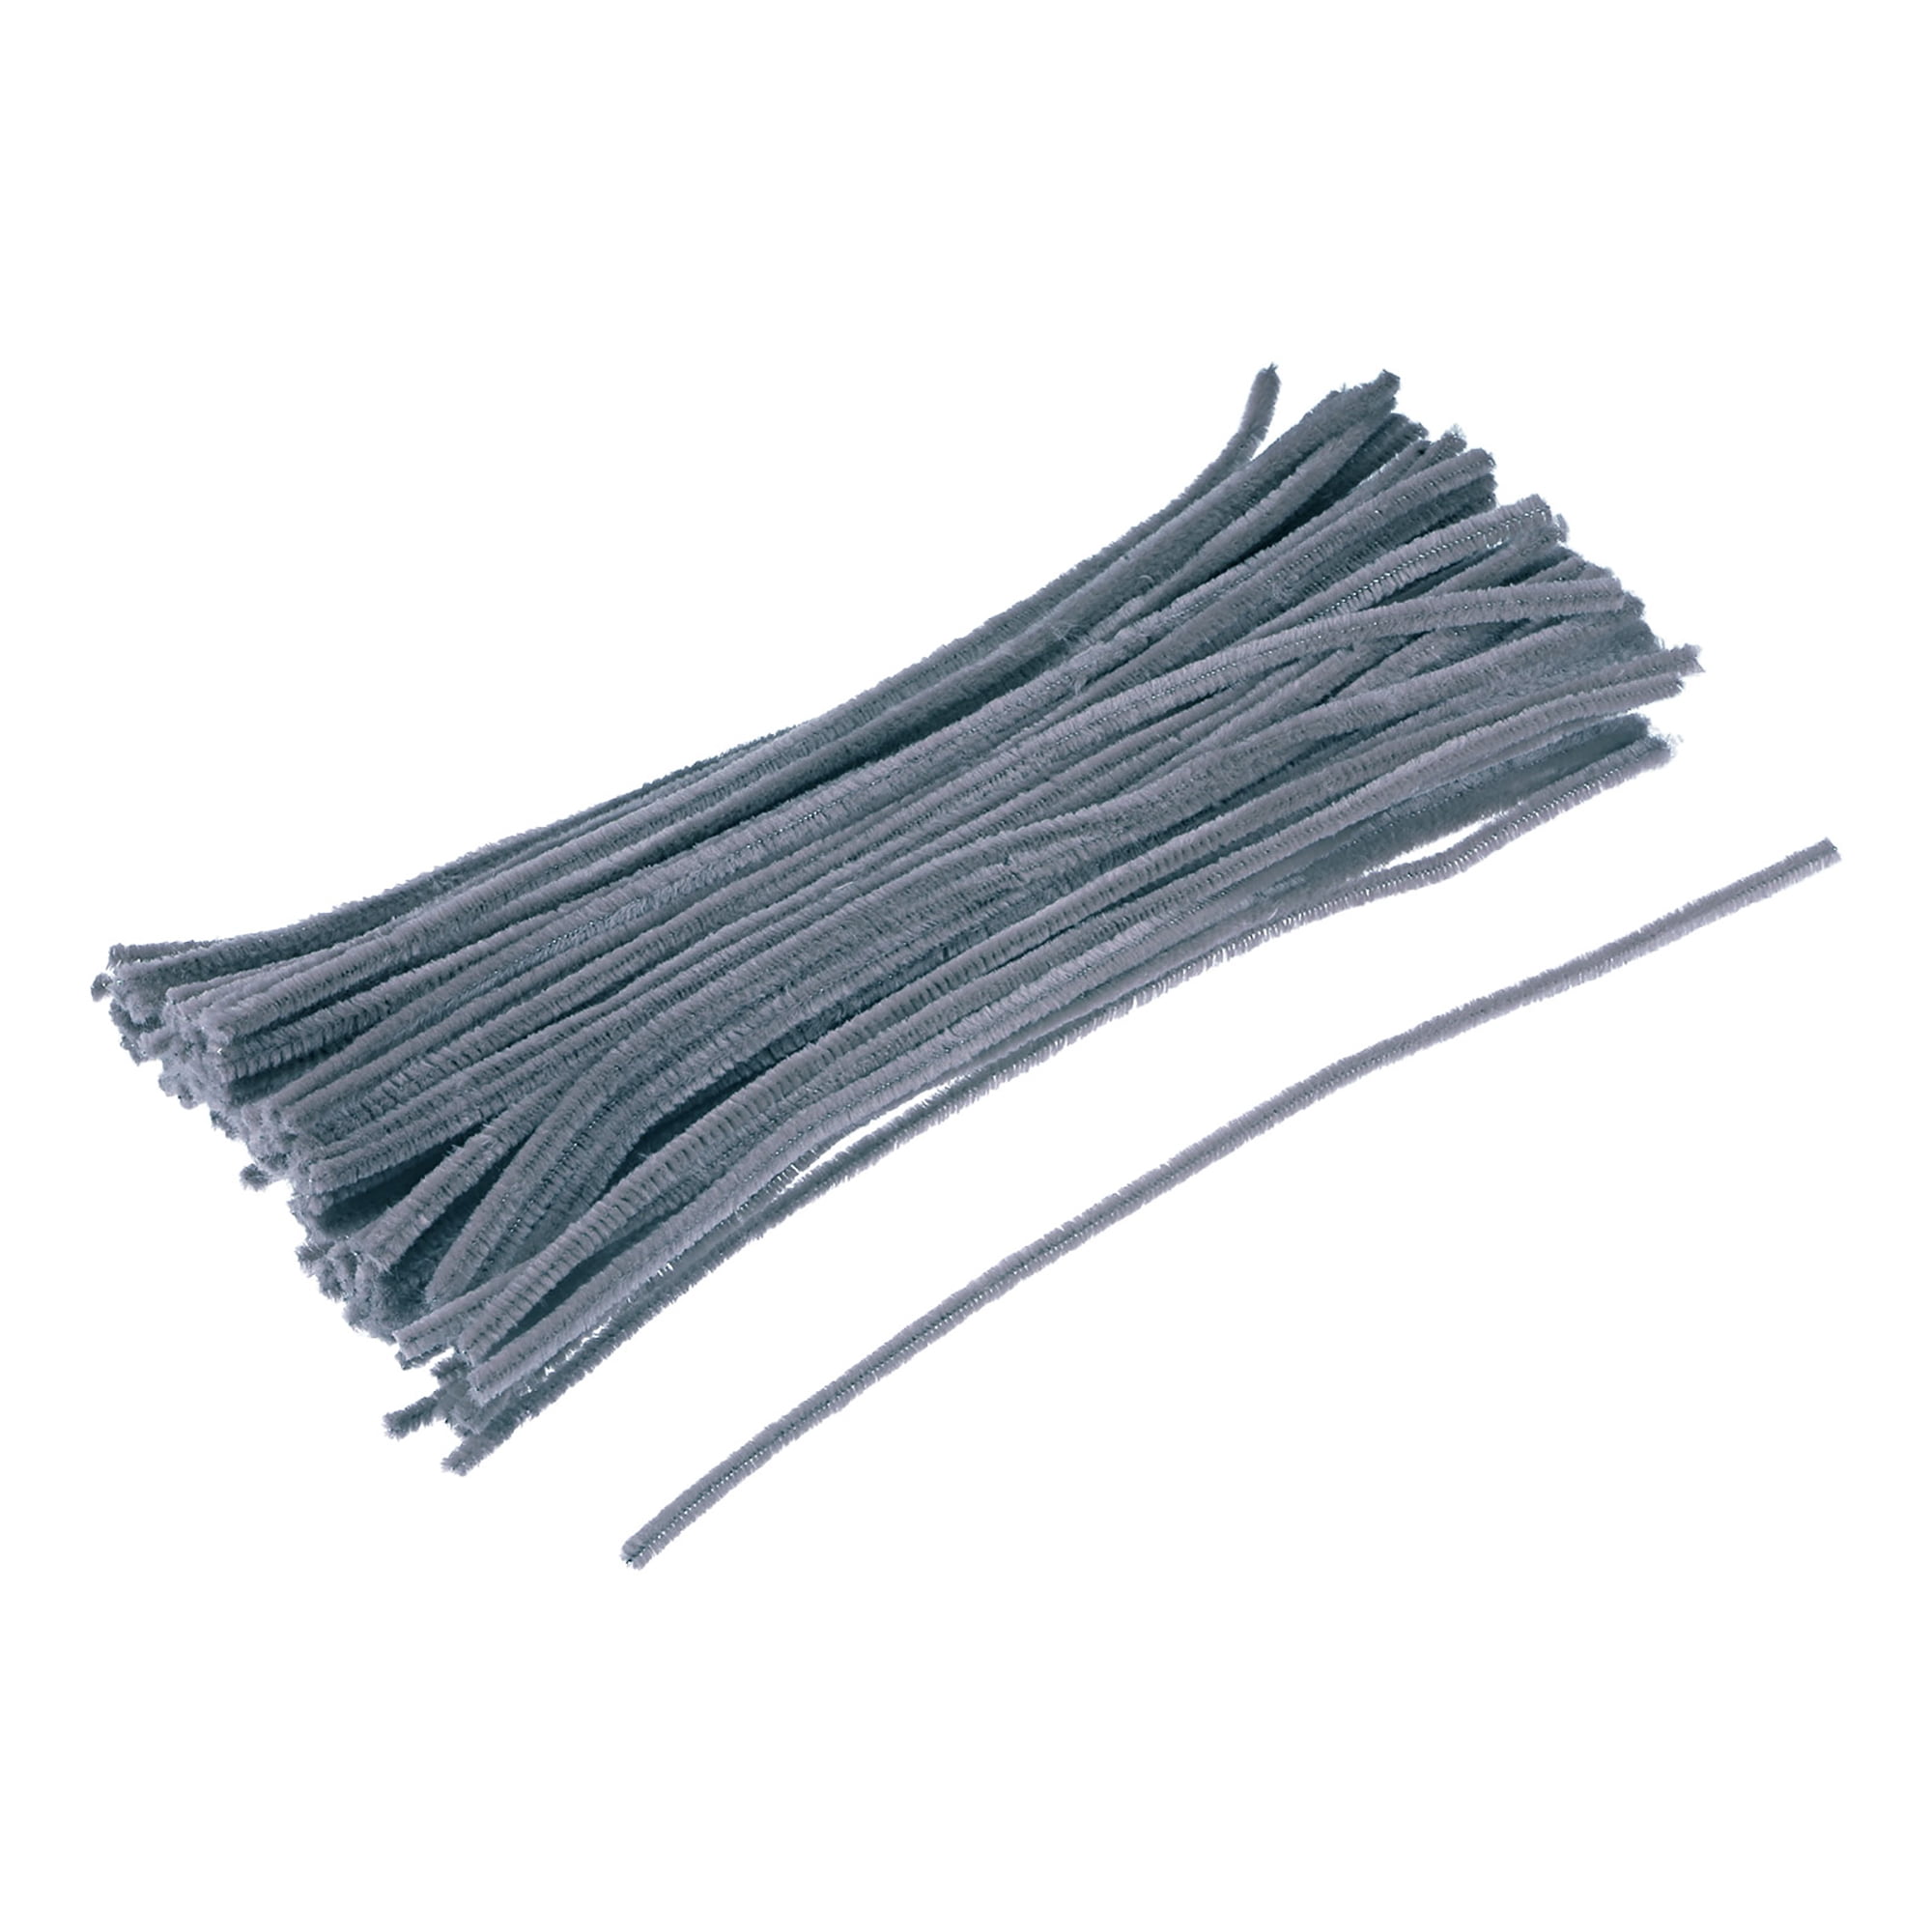 12 Pipe Cleaner Stems: 6mm Chenille Grey (100) [MA200110] 